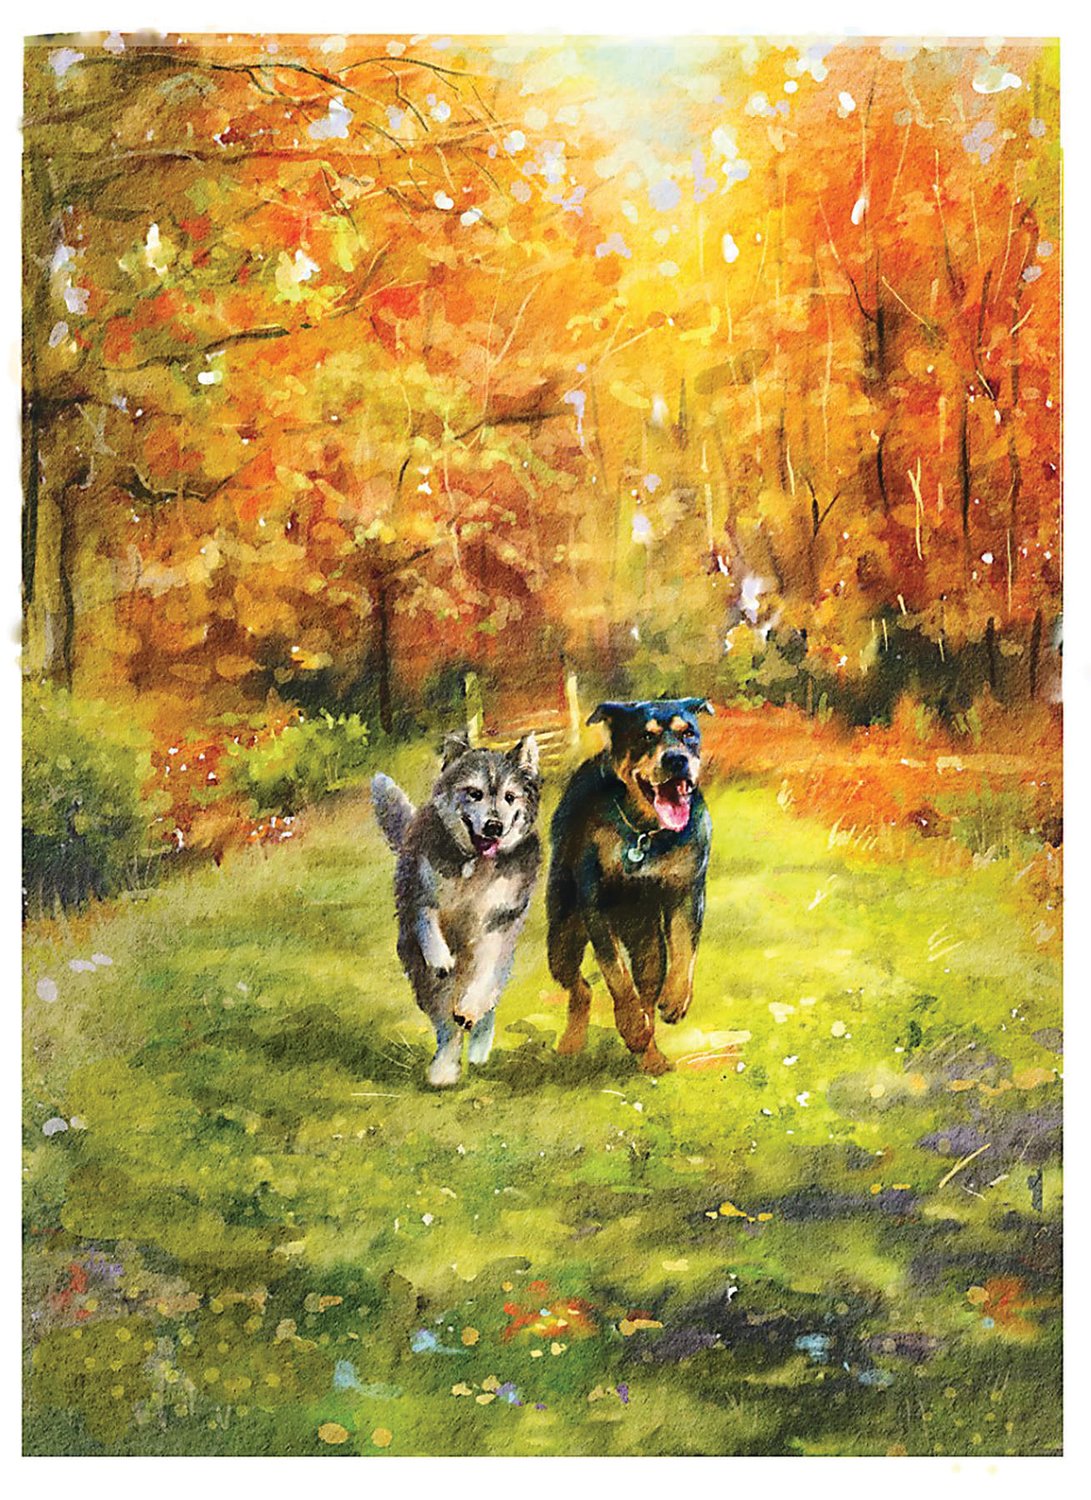 Artist Julia Martseniuk created this portrait of Cindy Woodall’s dogs, Buzzy and Jesse.